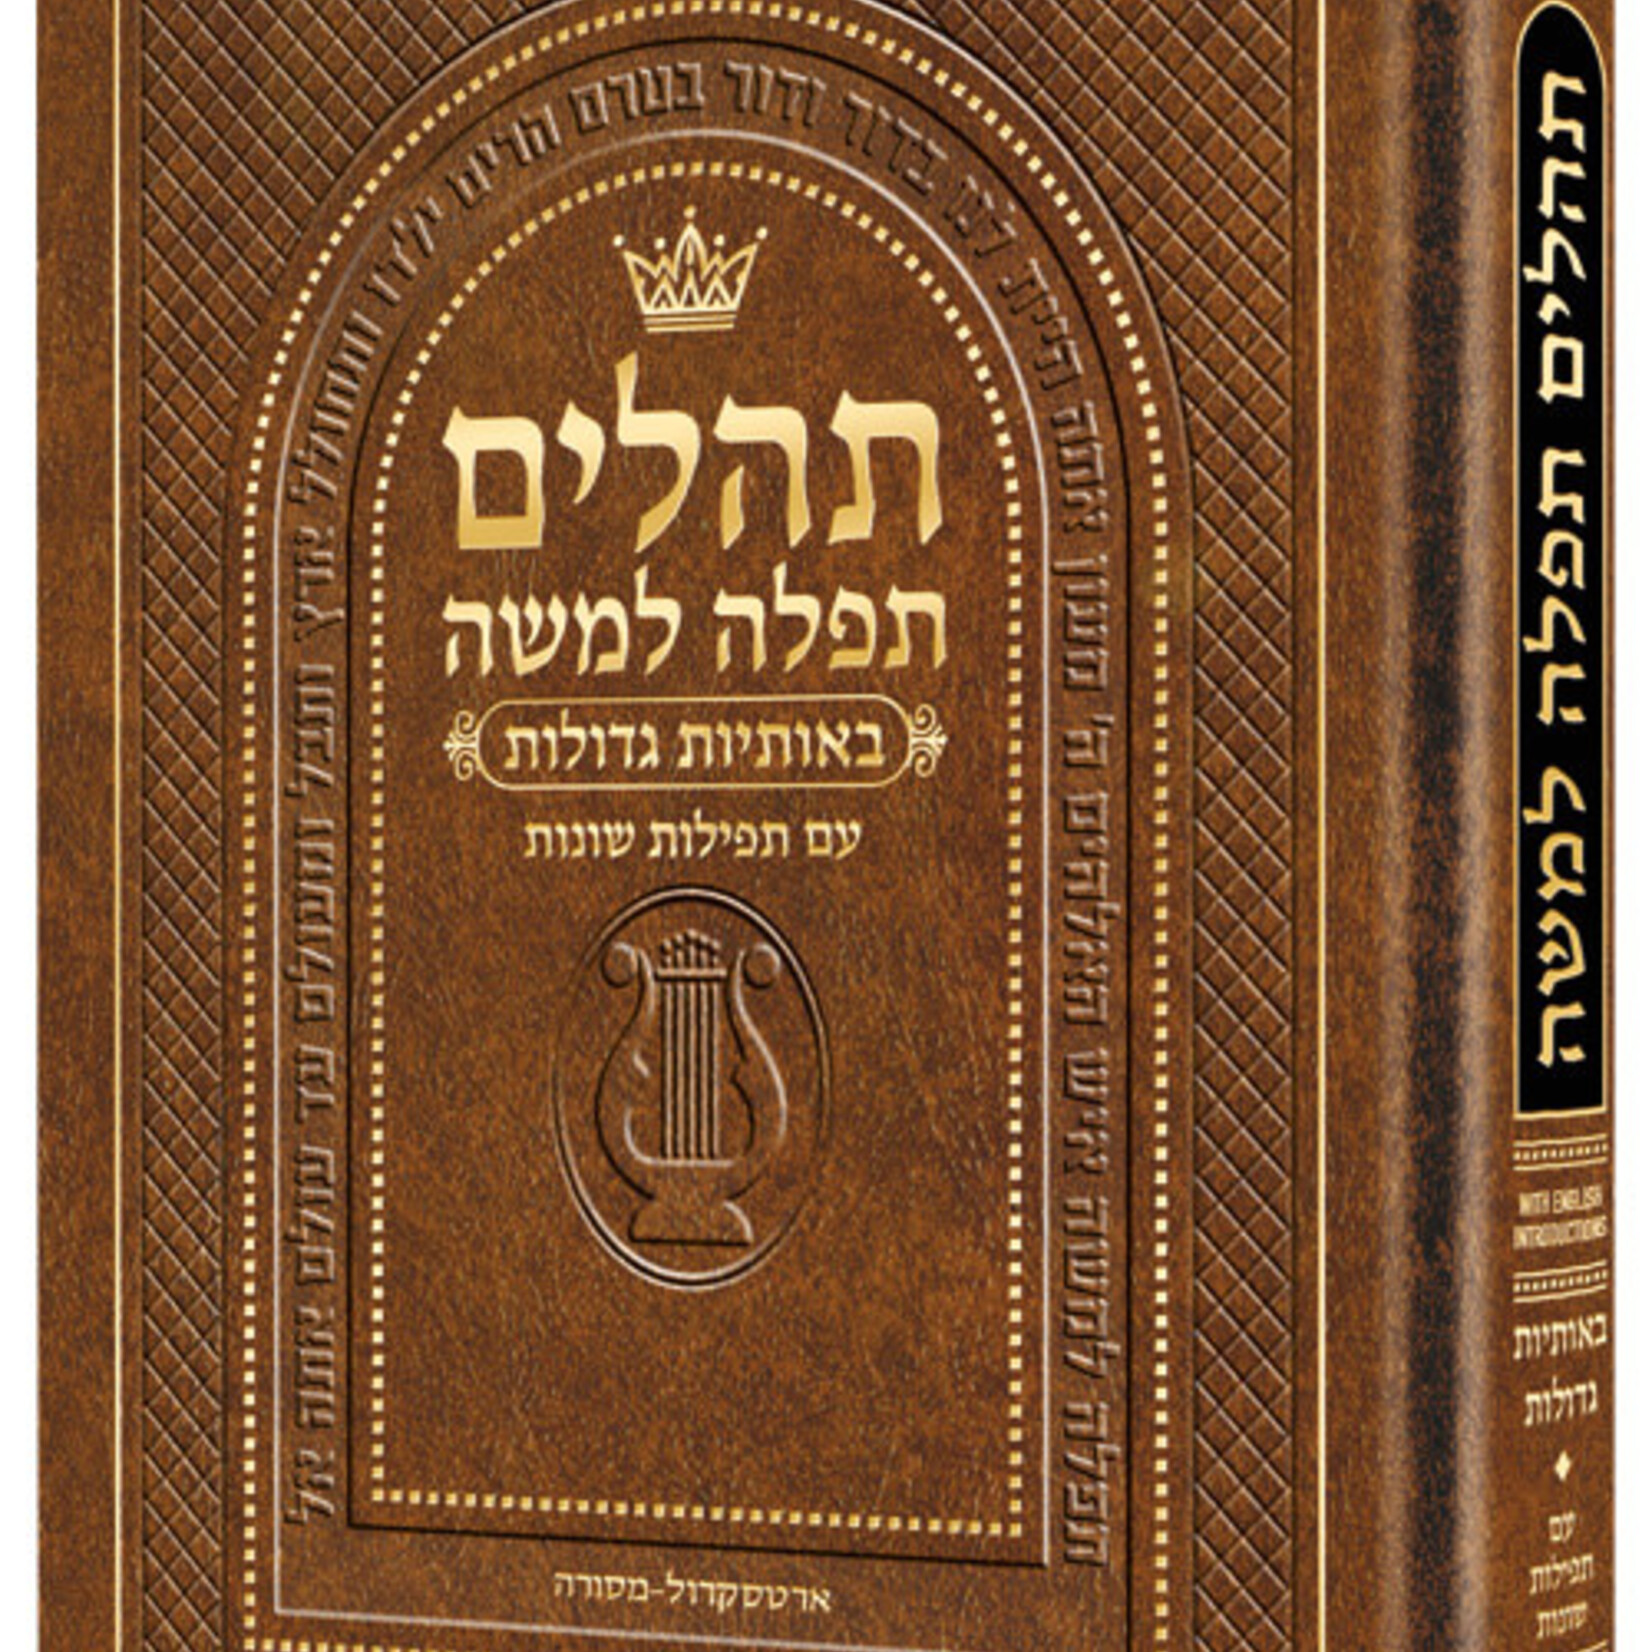 Hebrew Only, Large Type Tehillim with English Introductions- Hasbani Family Edition (Full Size Light Brown)